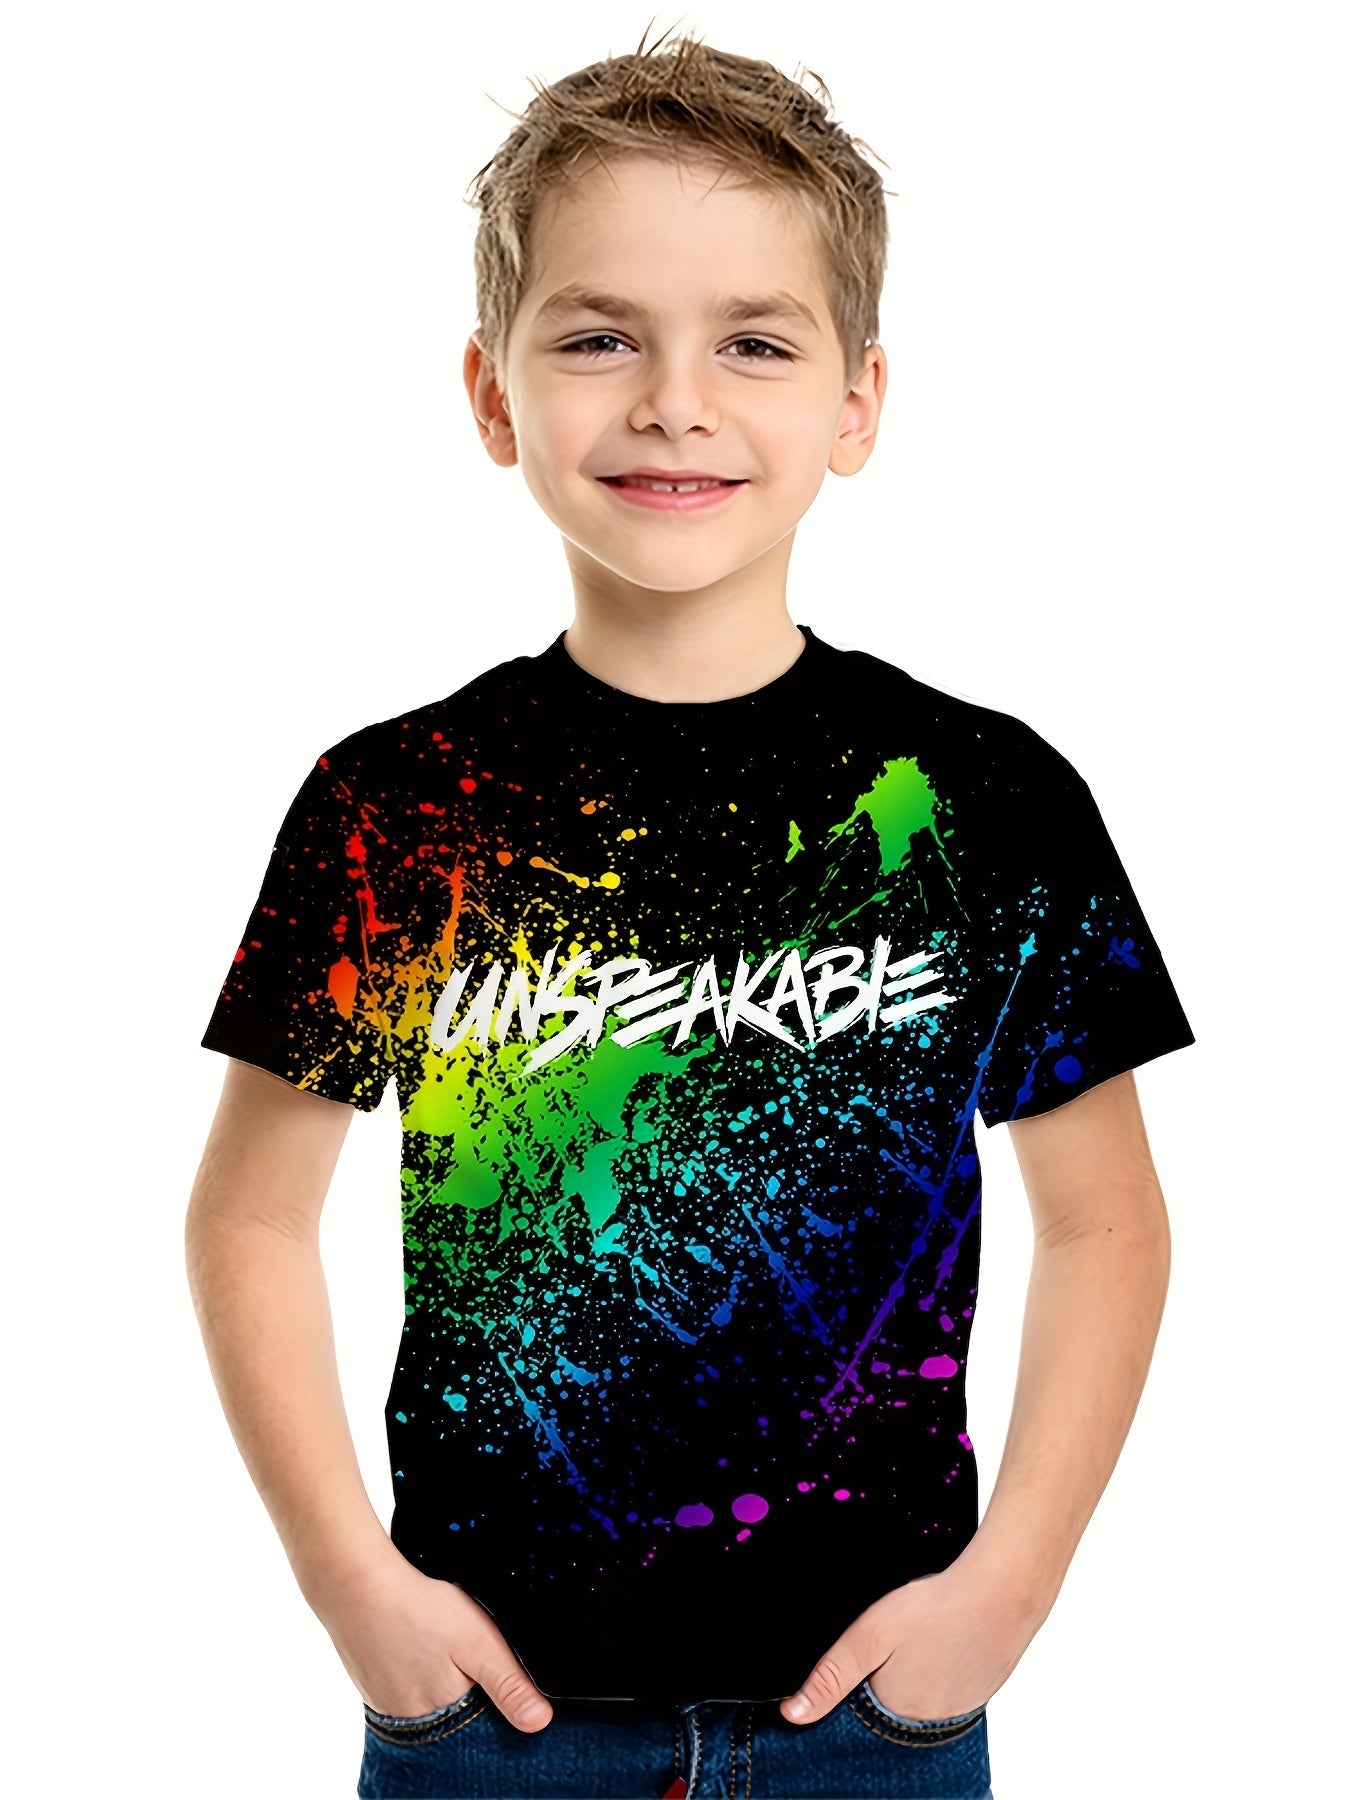 Paint Splash Pattern Kid's T-shirt, UNSPEAKABLE Print Casual Short Sleeve Top, Unisex Tee, Girl's & Boy's Clothes For Summer